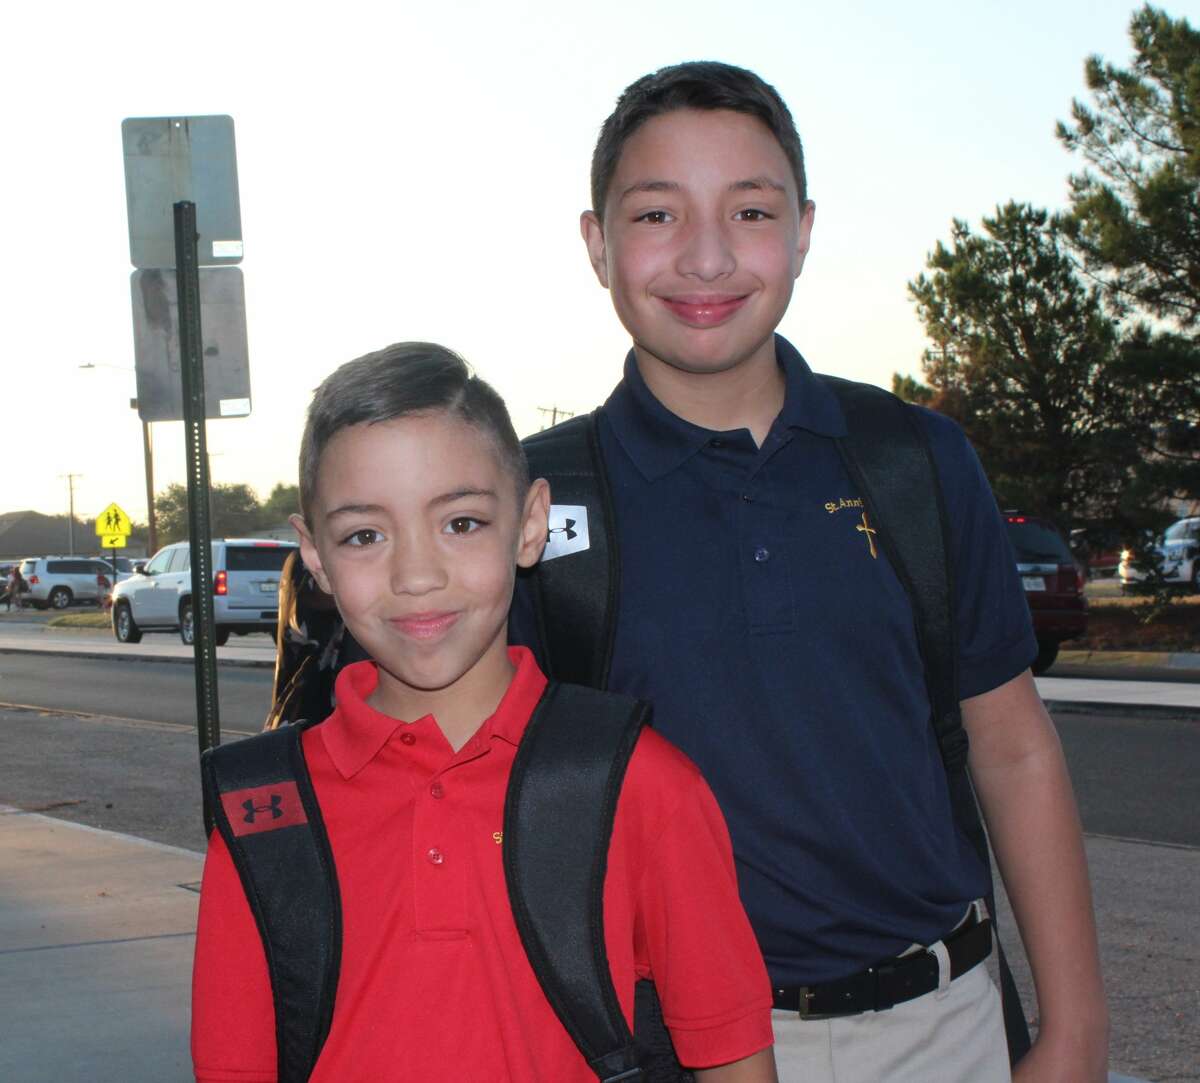 St. Ann's students return for the 2019-2020 school year.